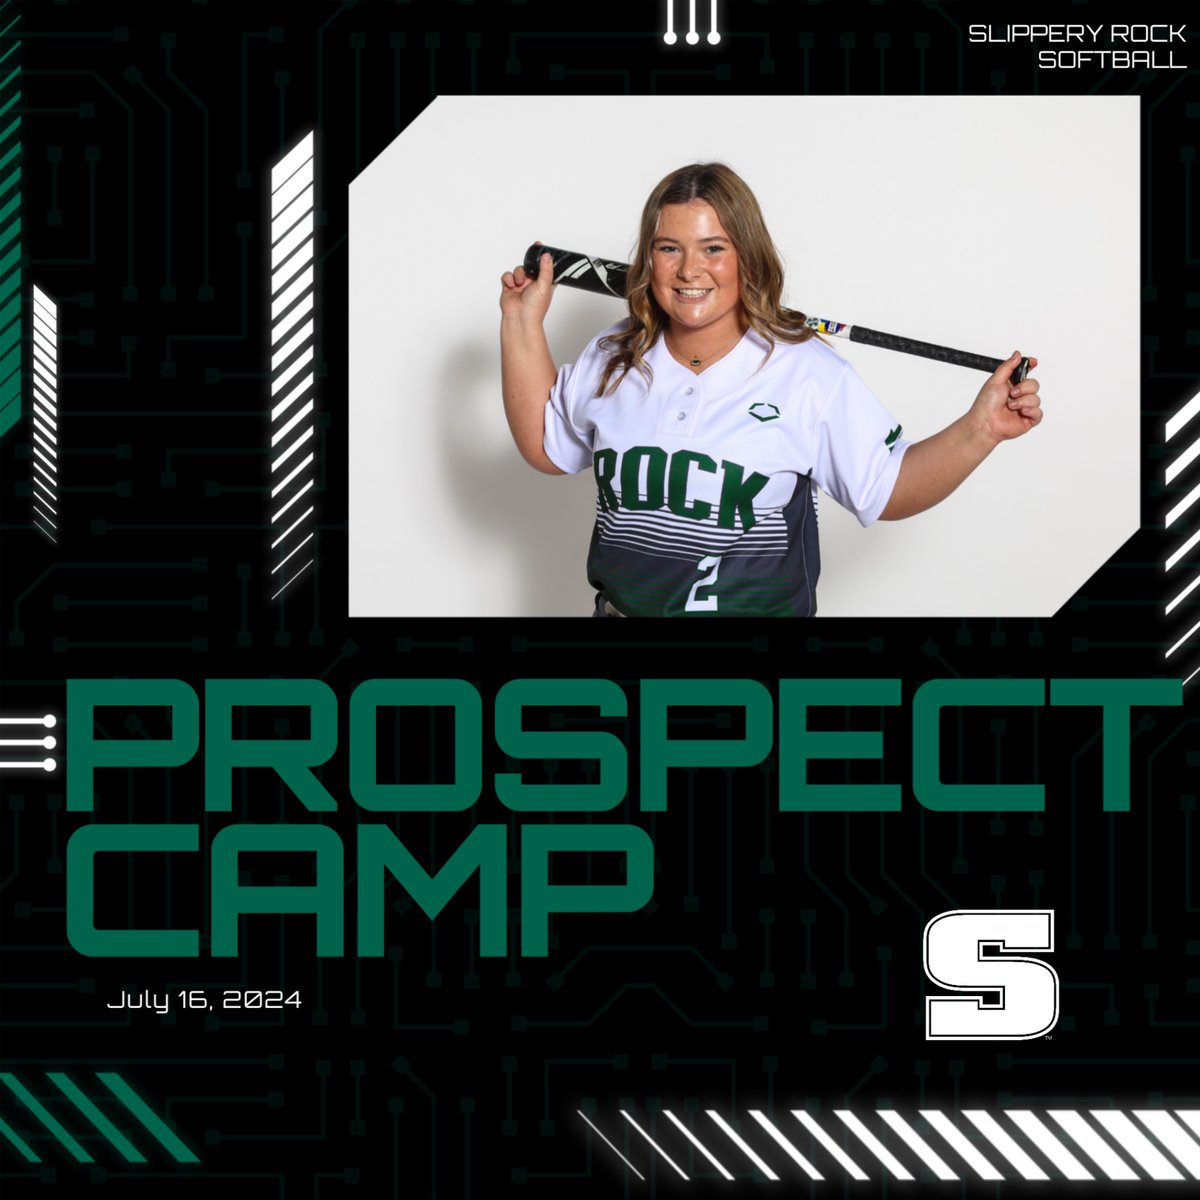 July 16th, 2024! Join us at our Summer Prospect Camp to display your softball skills to the Slippery Rock University coaching staff and learn about SRU🤘🏼 Click the link in our bio to register! #slipperyrockuniversity #rockathletics